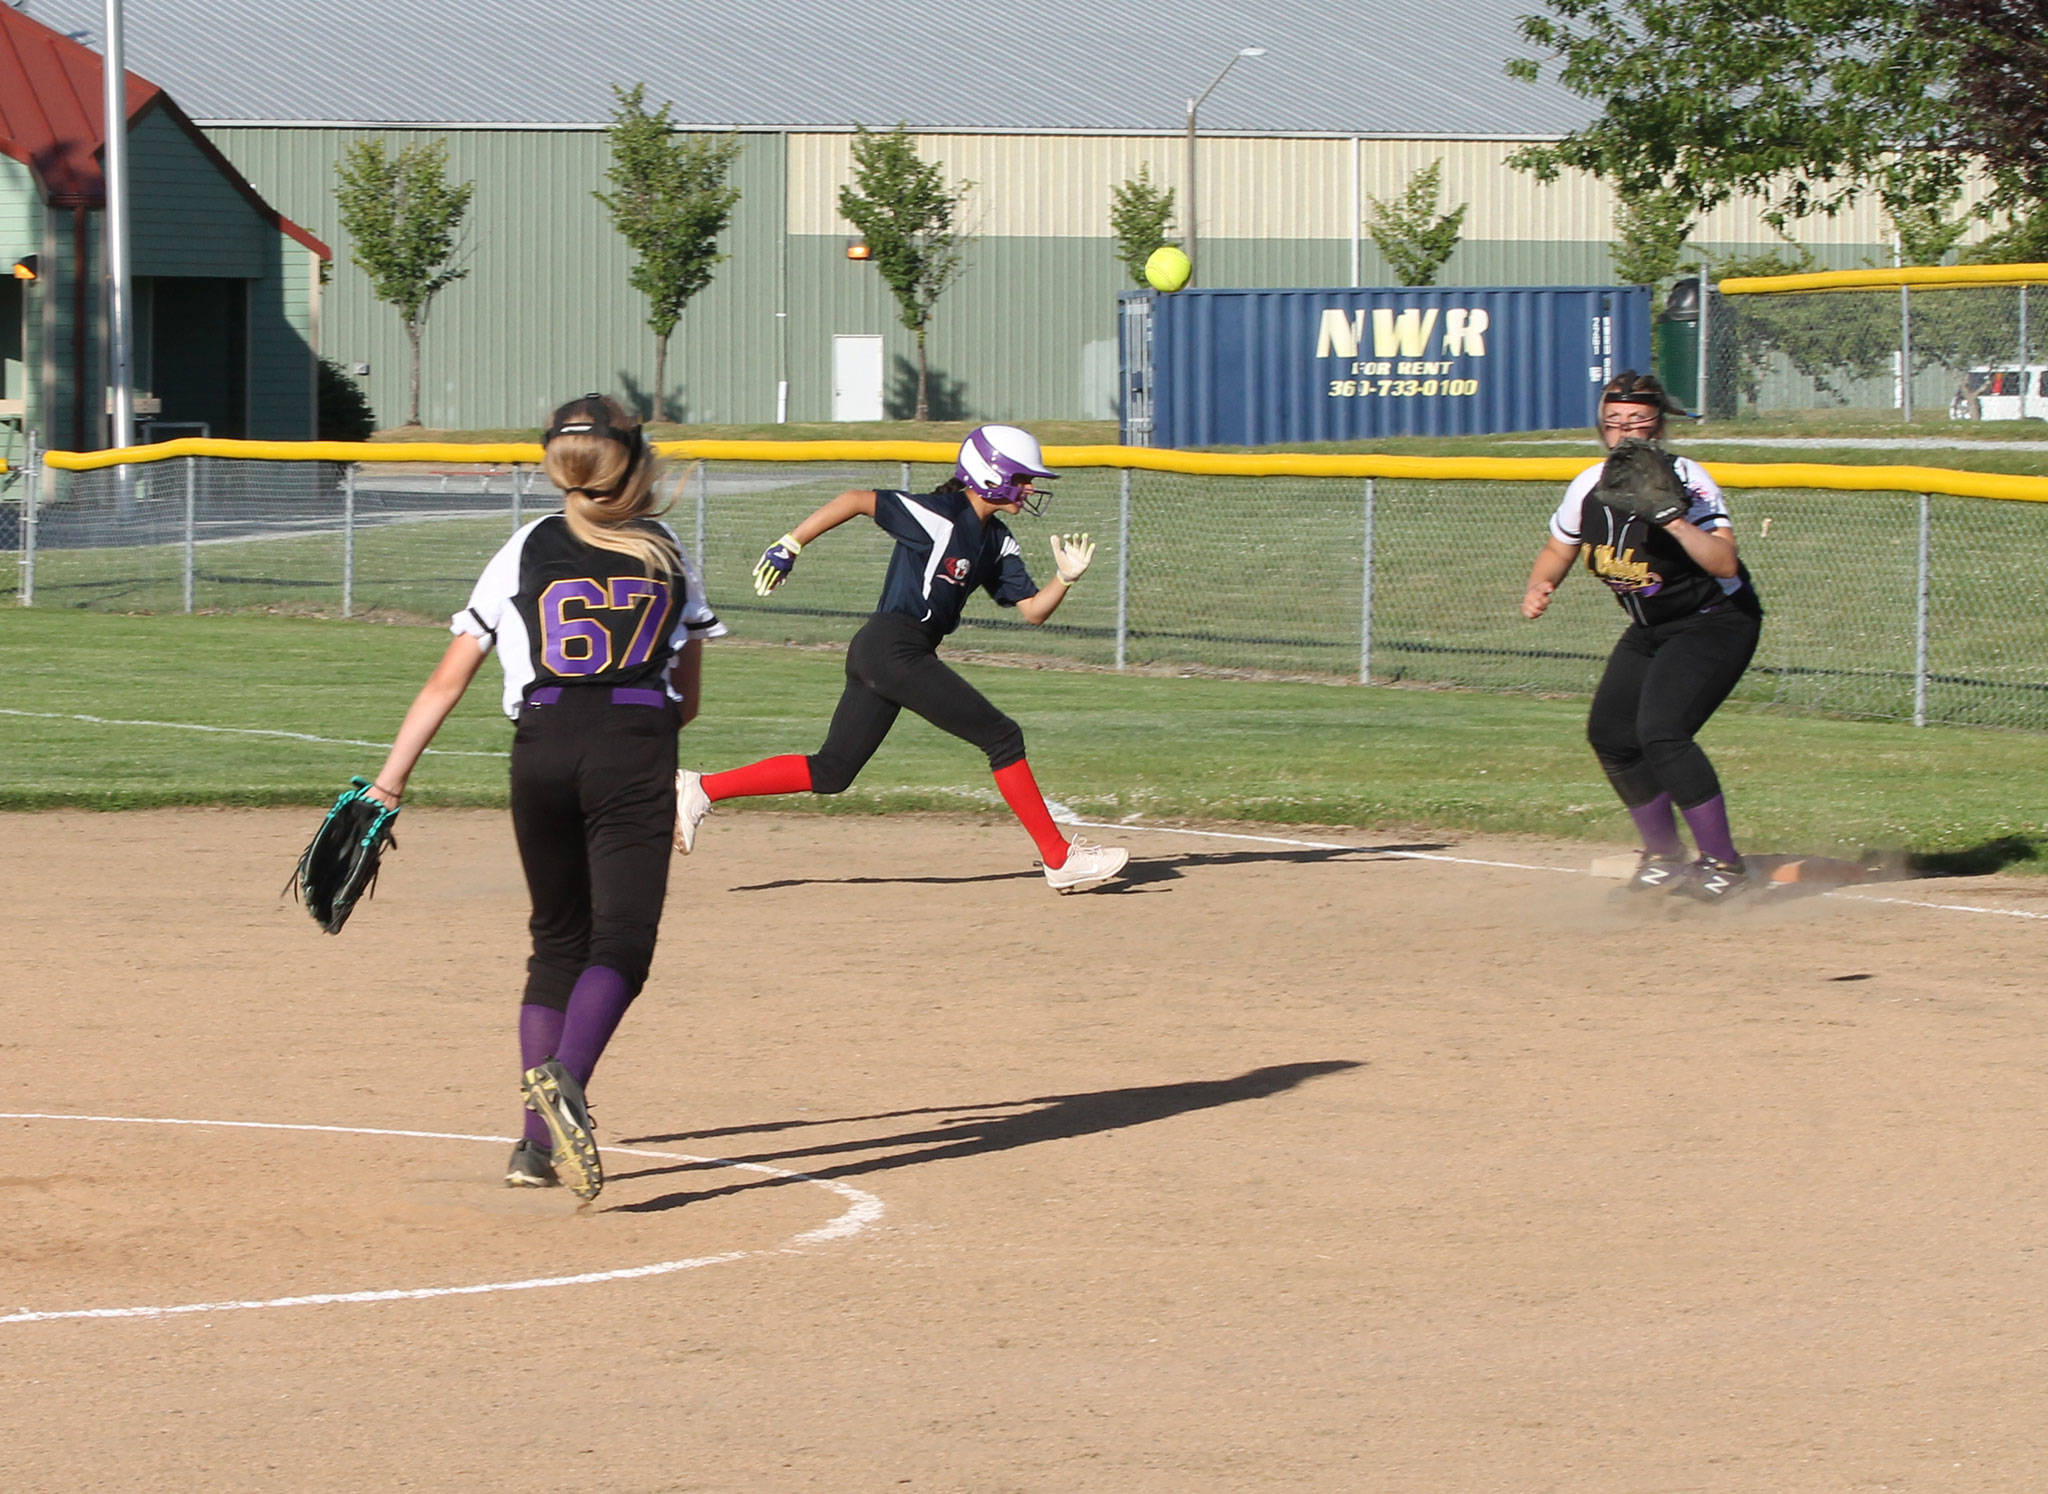 After fielding a grounder, North Whidbey pitcher Lydia Ster throws to first baseman Haylee Bingham for an out. A South Skagit runner, who started on first base, mistakenly ran back to the bag on the play before heading to second. (Photo by Jim Waller/Whidbey News-Times)